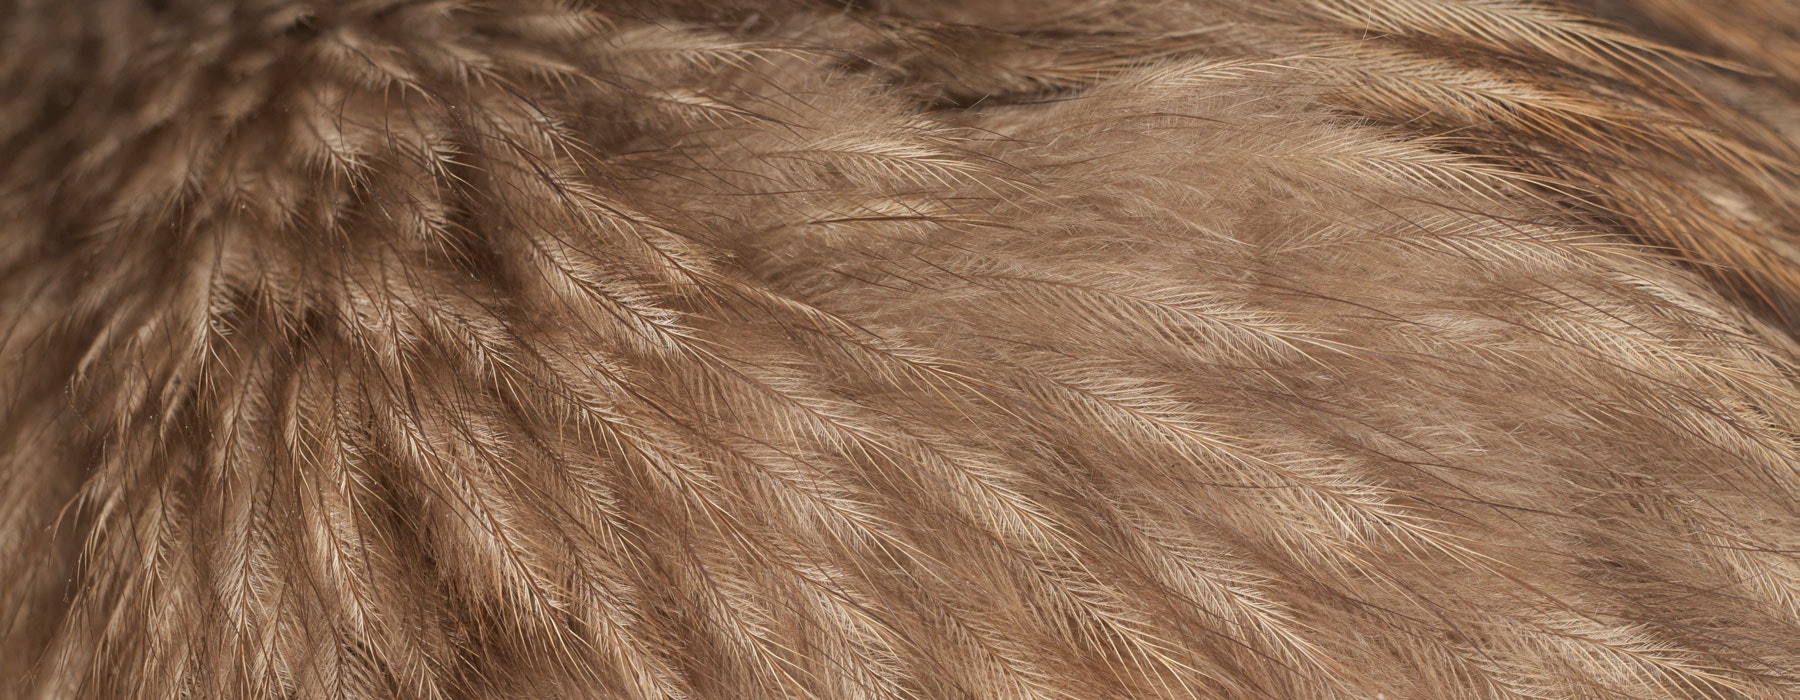 Close-up of brown feathers